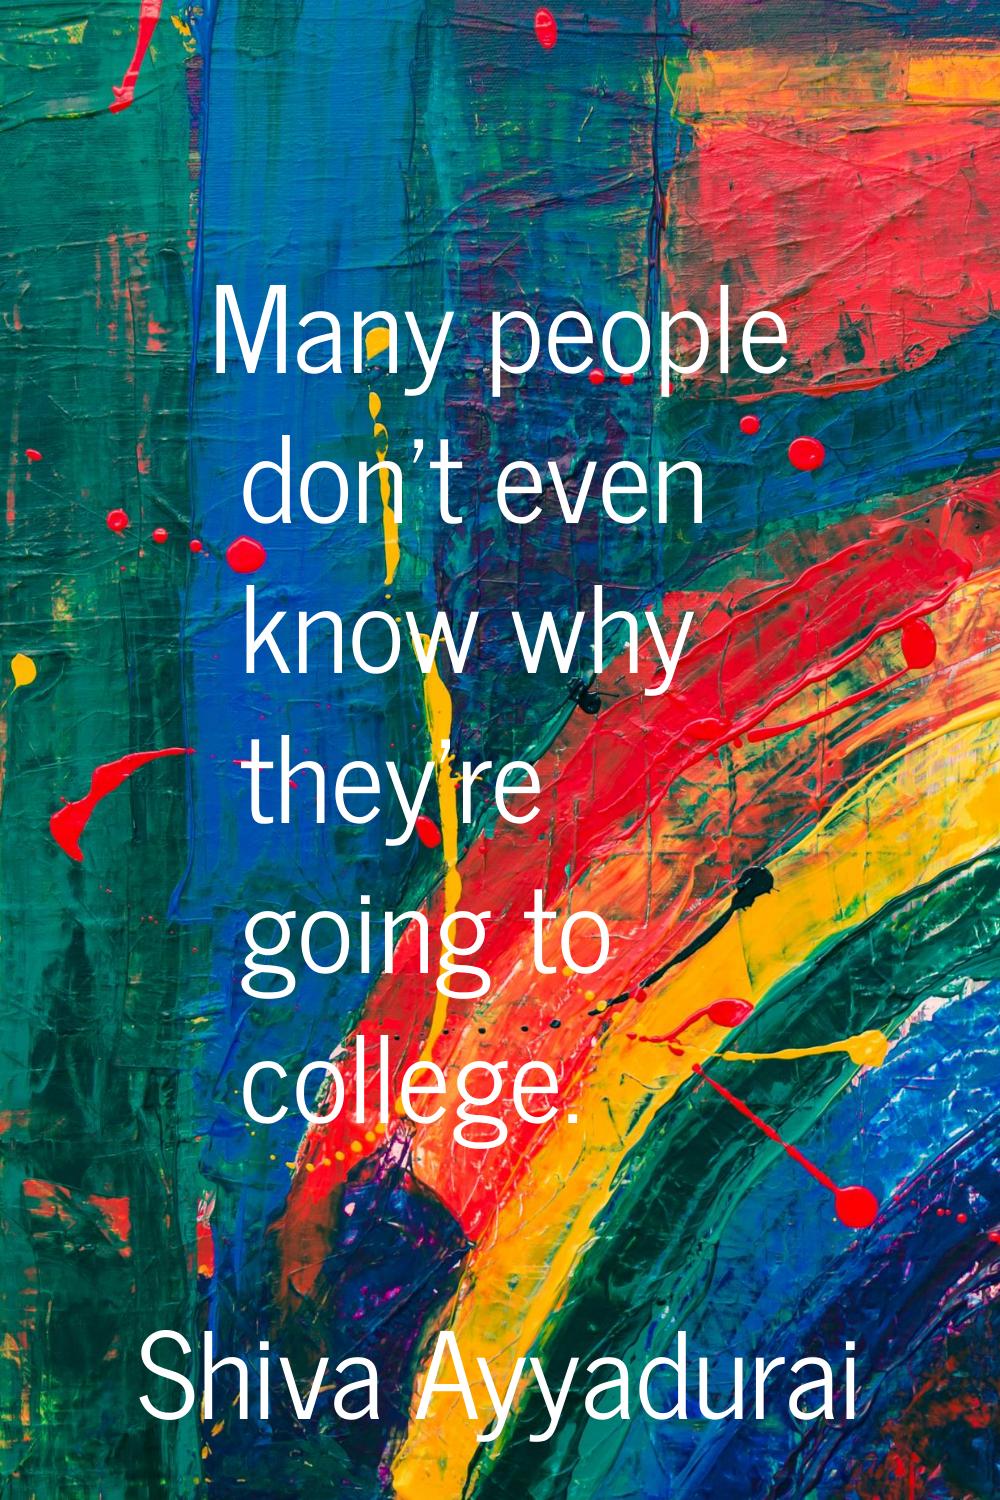 Many people don't even know why they're going to college.